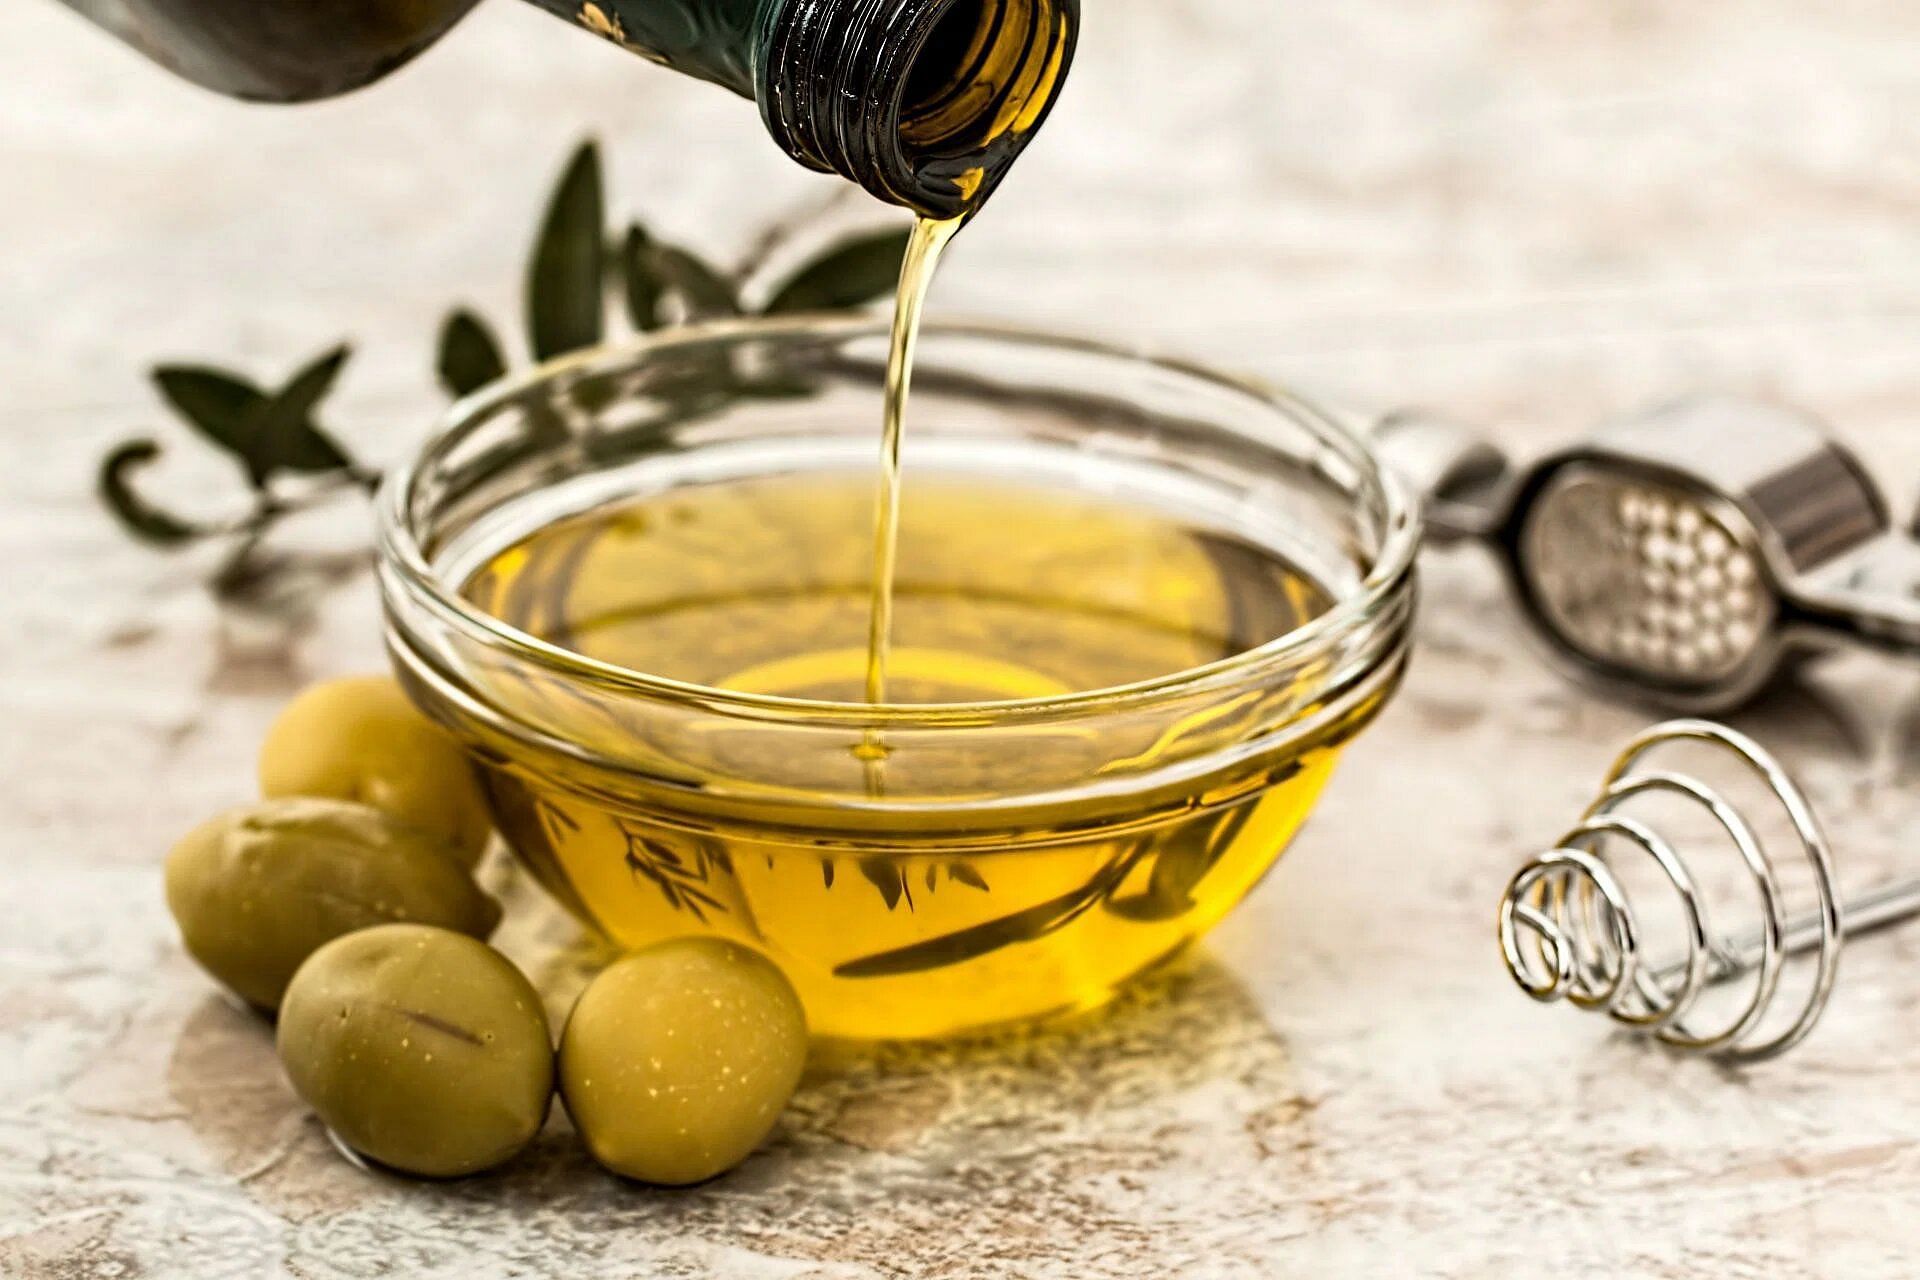 Top 5 health benefits of olive oil